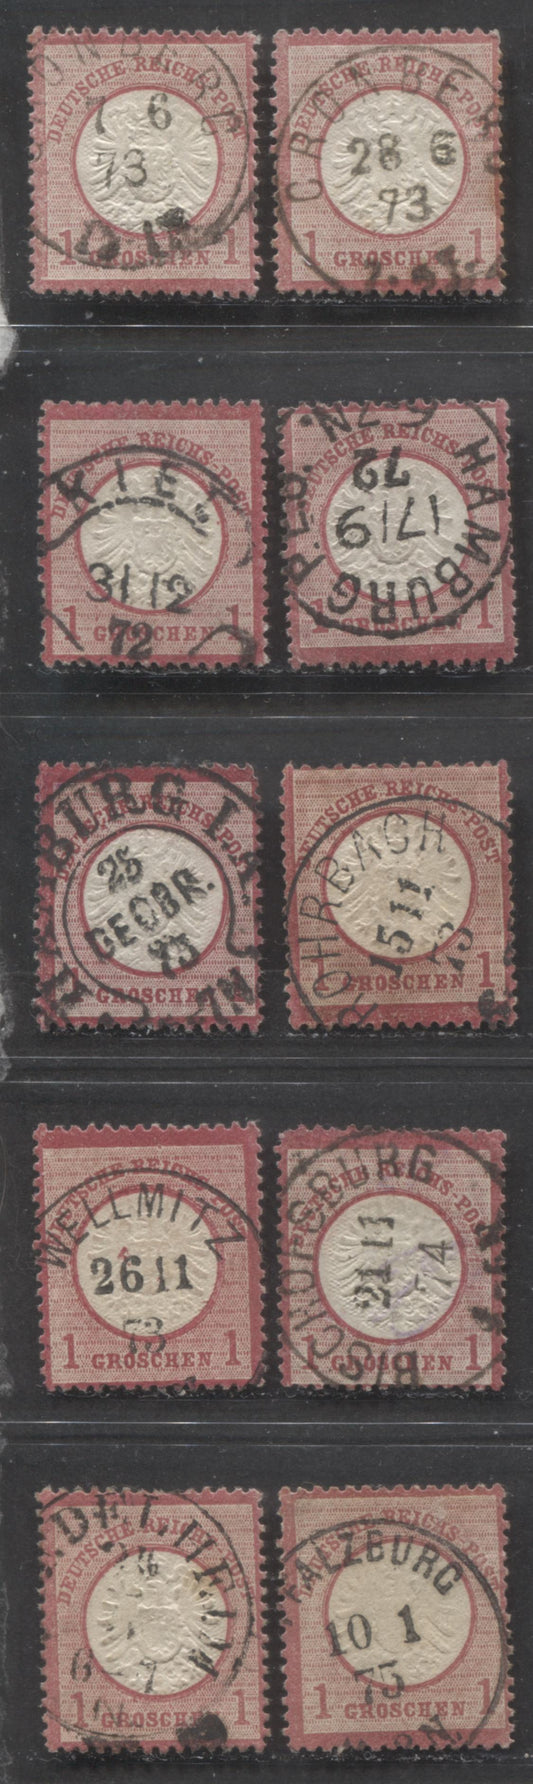 Lot 413 Germany SC#17 1g Deep Rose 1872 Eagle & Large Shield Issue, All With SON Town Cancels, 10 VG, F and VF Used Singles, Click on Listing to See ALL Pictures, Estimated Value $35